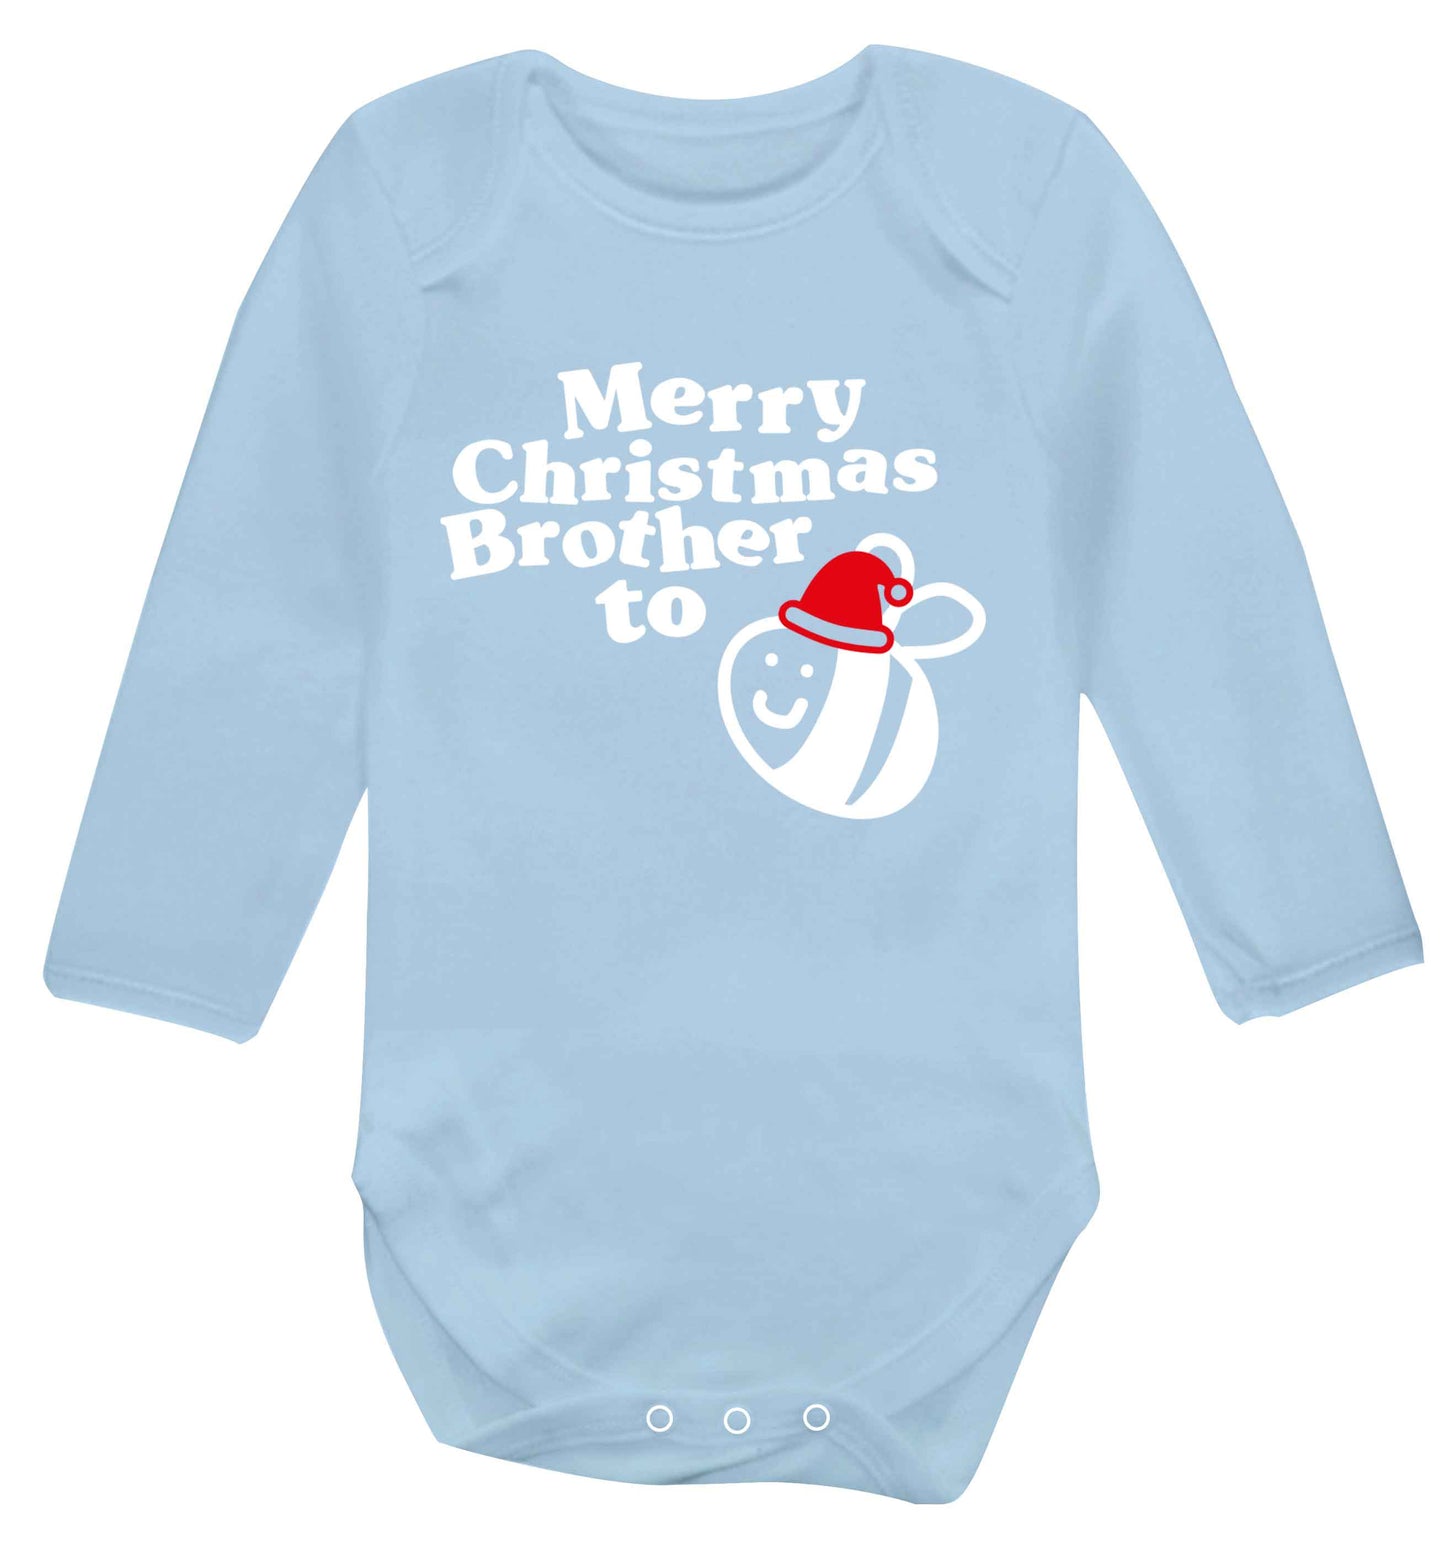 Merry Christmas brother to be Baby Vest long sleeved pale blue 6-12 months